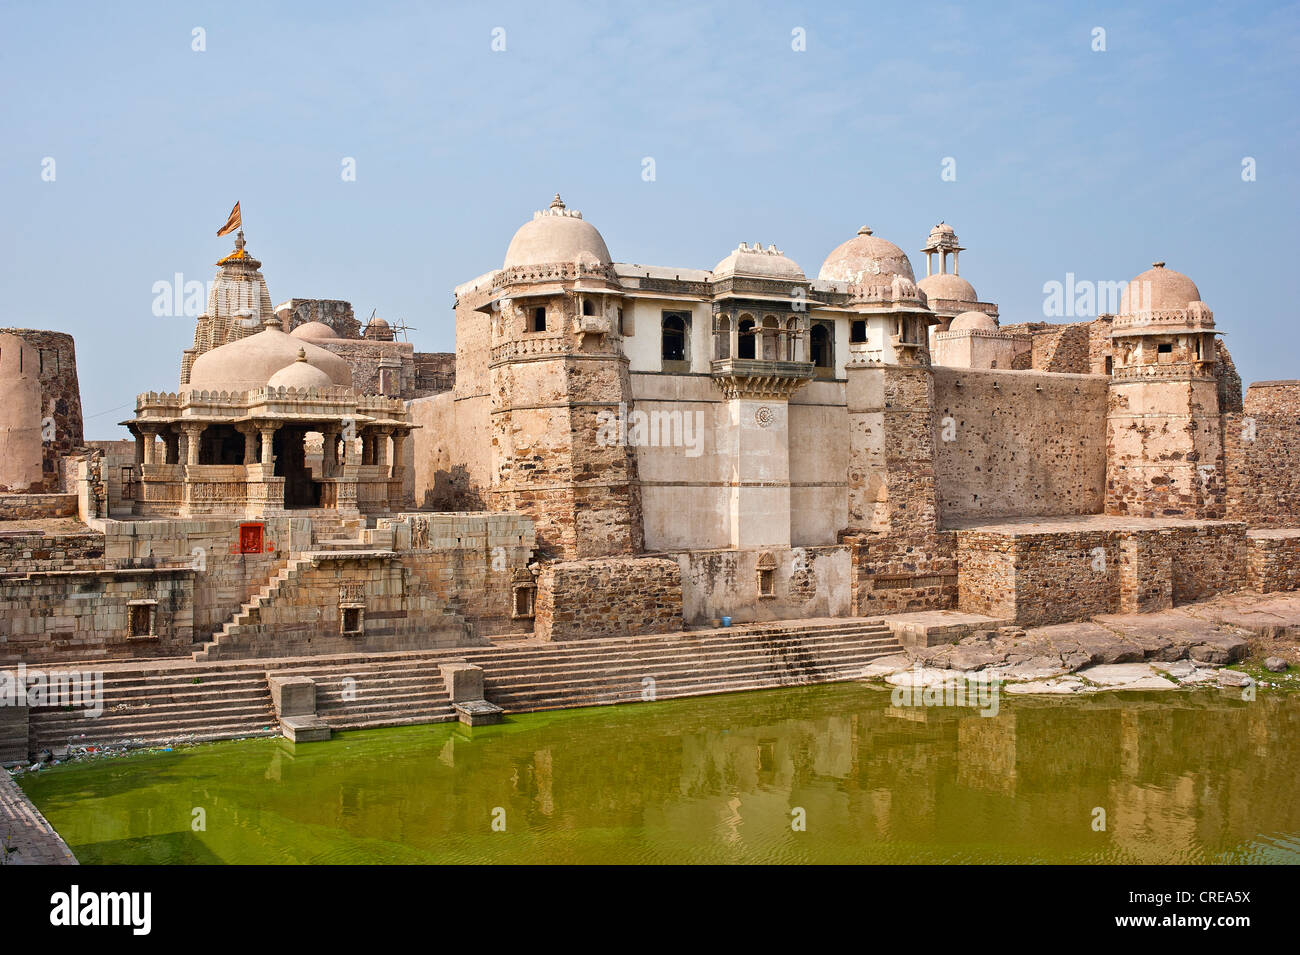 Ancient palace with an artificial lake, Chittorgarh Fort, Rajasthan, India, Asia Stock Photo